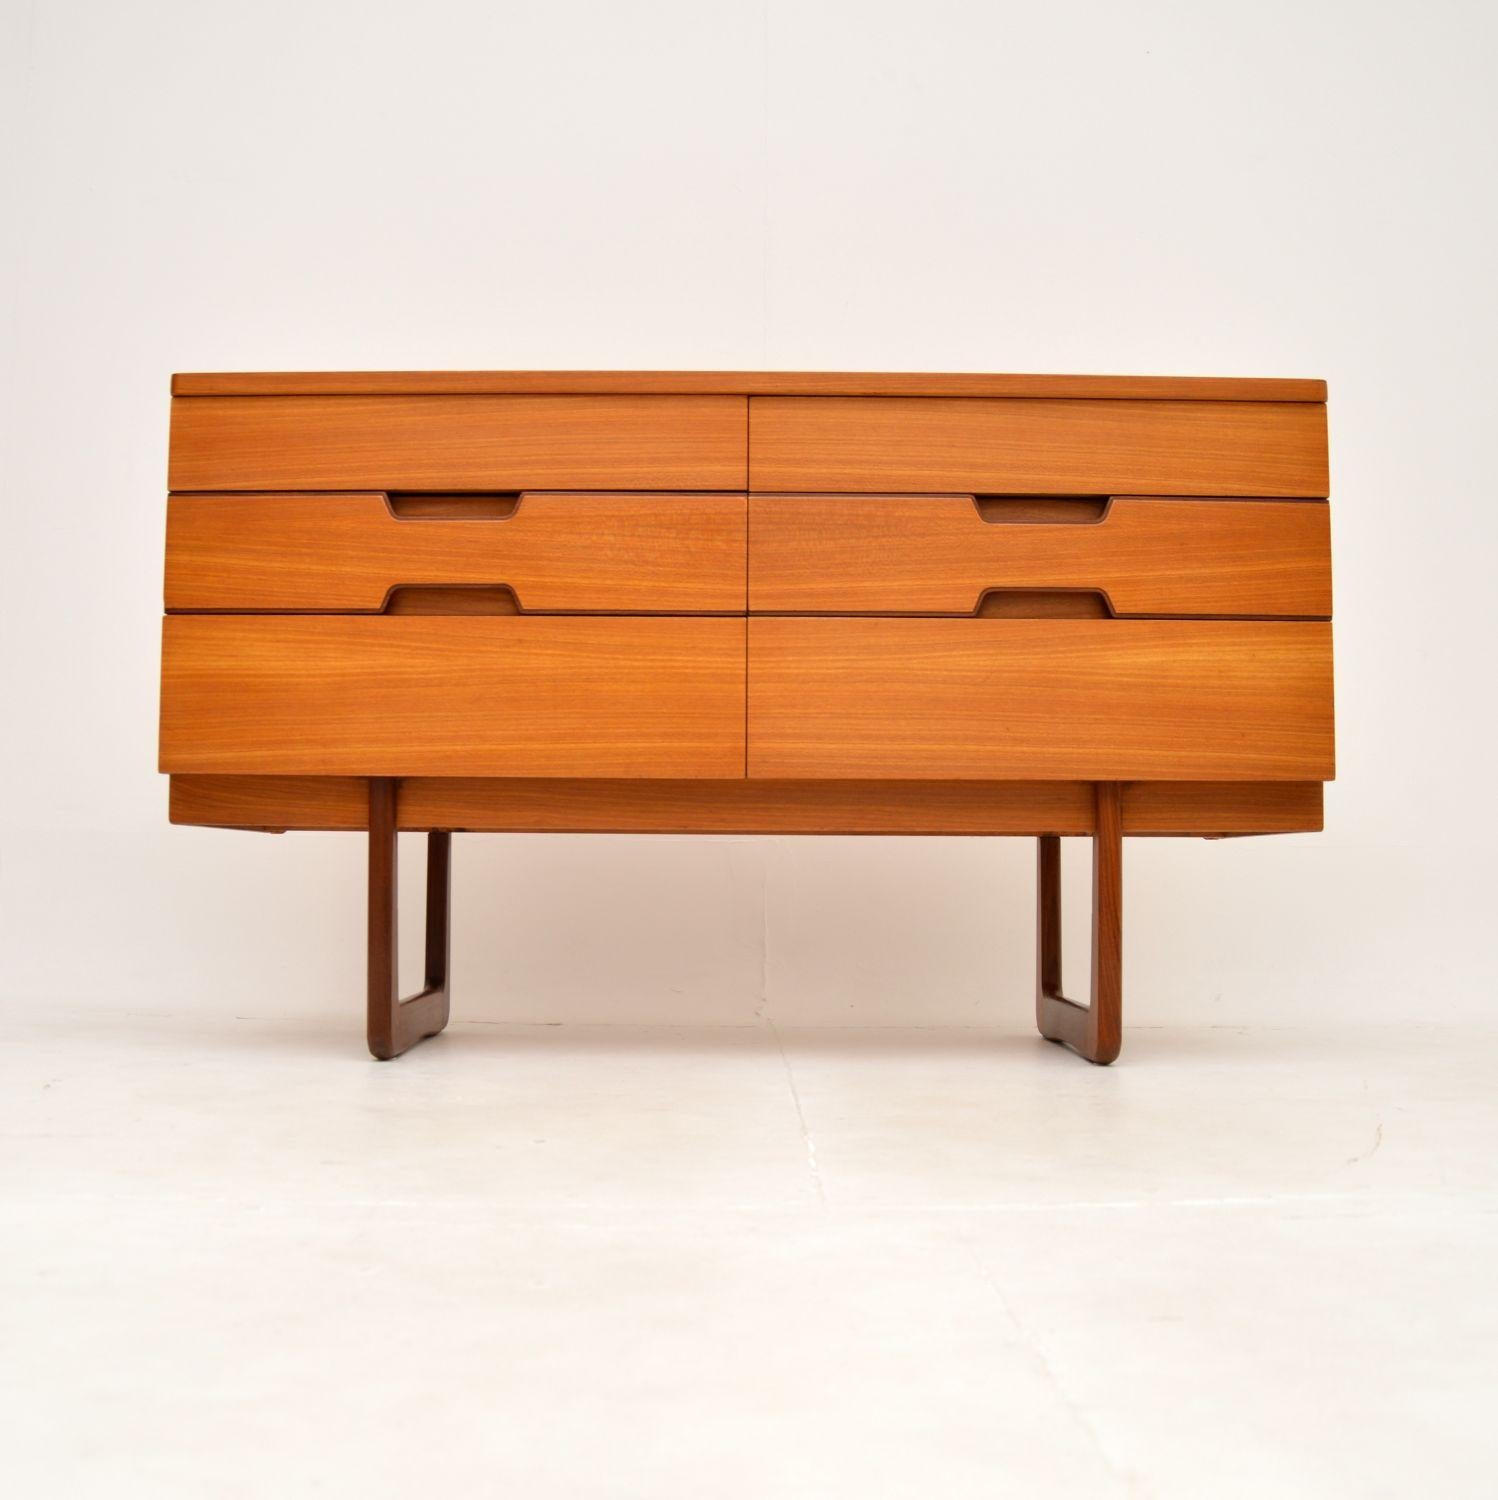 A beautifully designed and very useful vintage walnut sideboard / chest of drawers by Uniflex. This was designed by Gunther Hoffstead, it was made in England, and dates from the 1960’s.

It is of fantastic quality, with a sleek and stylish design.